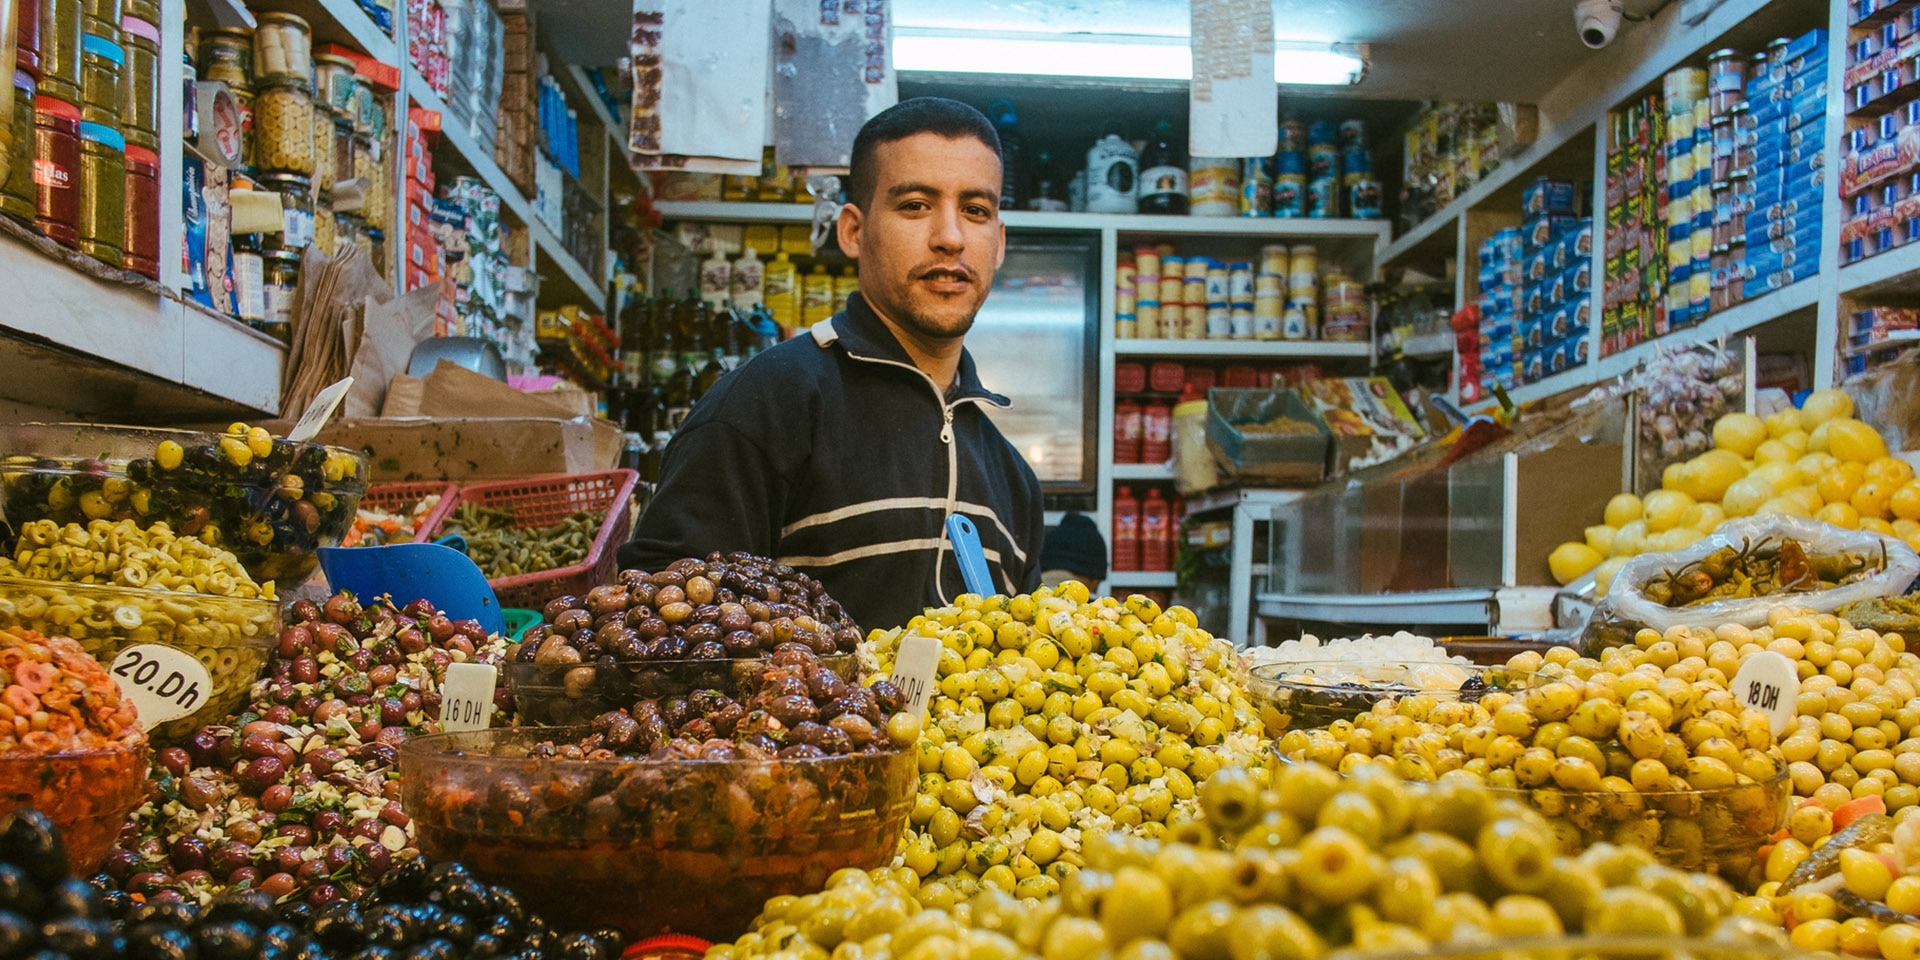 An olive seller stands in a small shop in front of a large display of olives of all kinds.